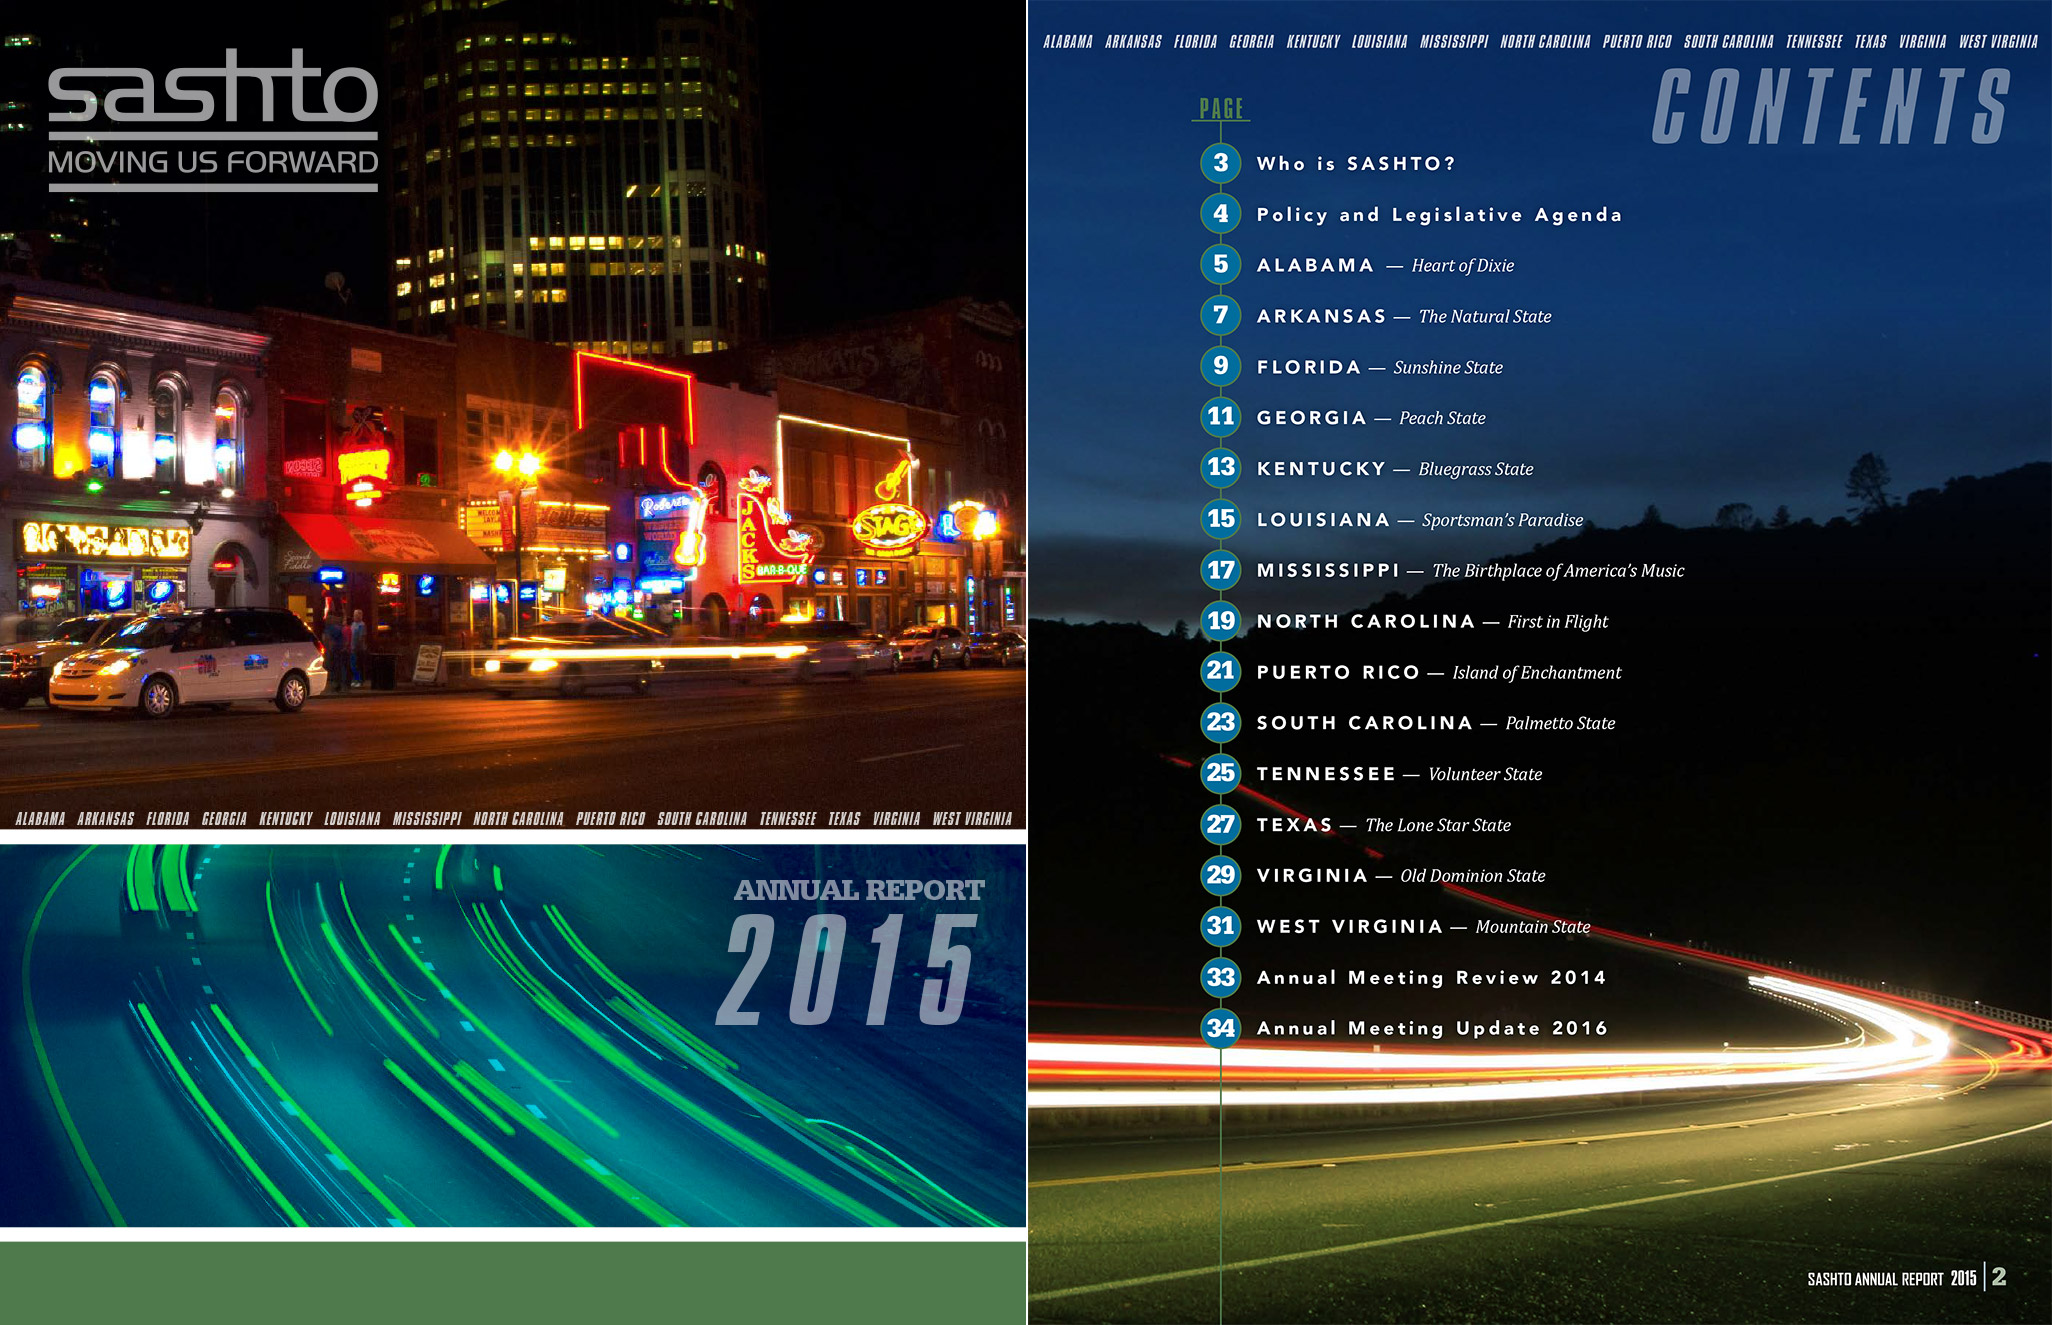 Download the 2015 Annual Report